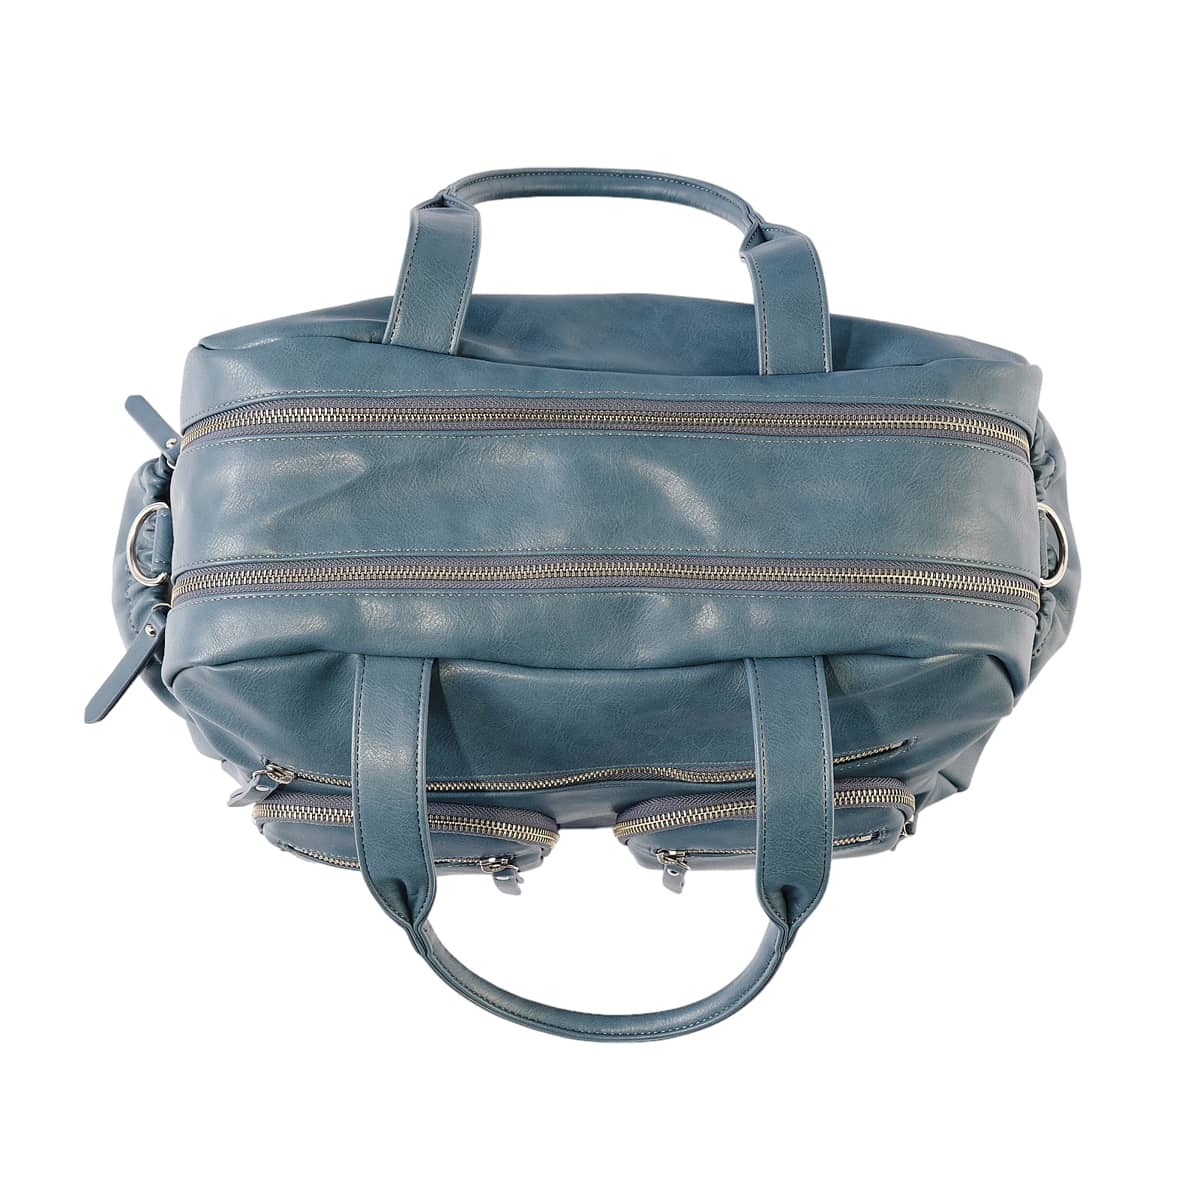 OiOi Faux Leather Carry All Nappy Bag - Stone Blue